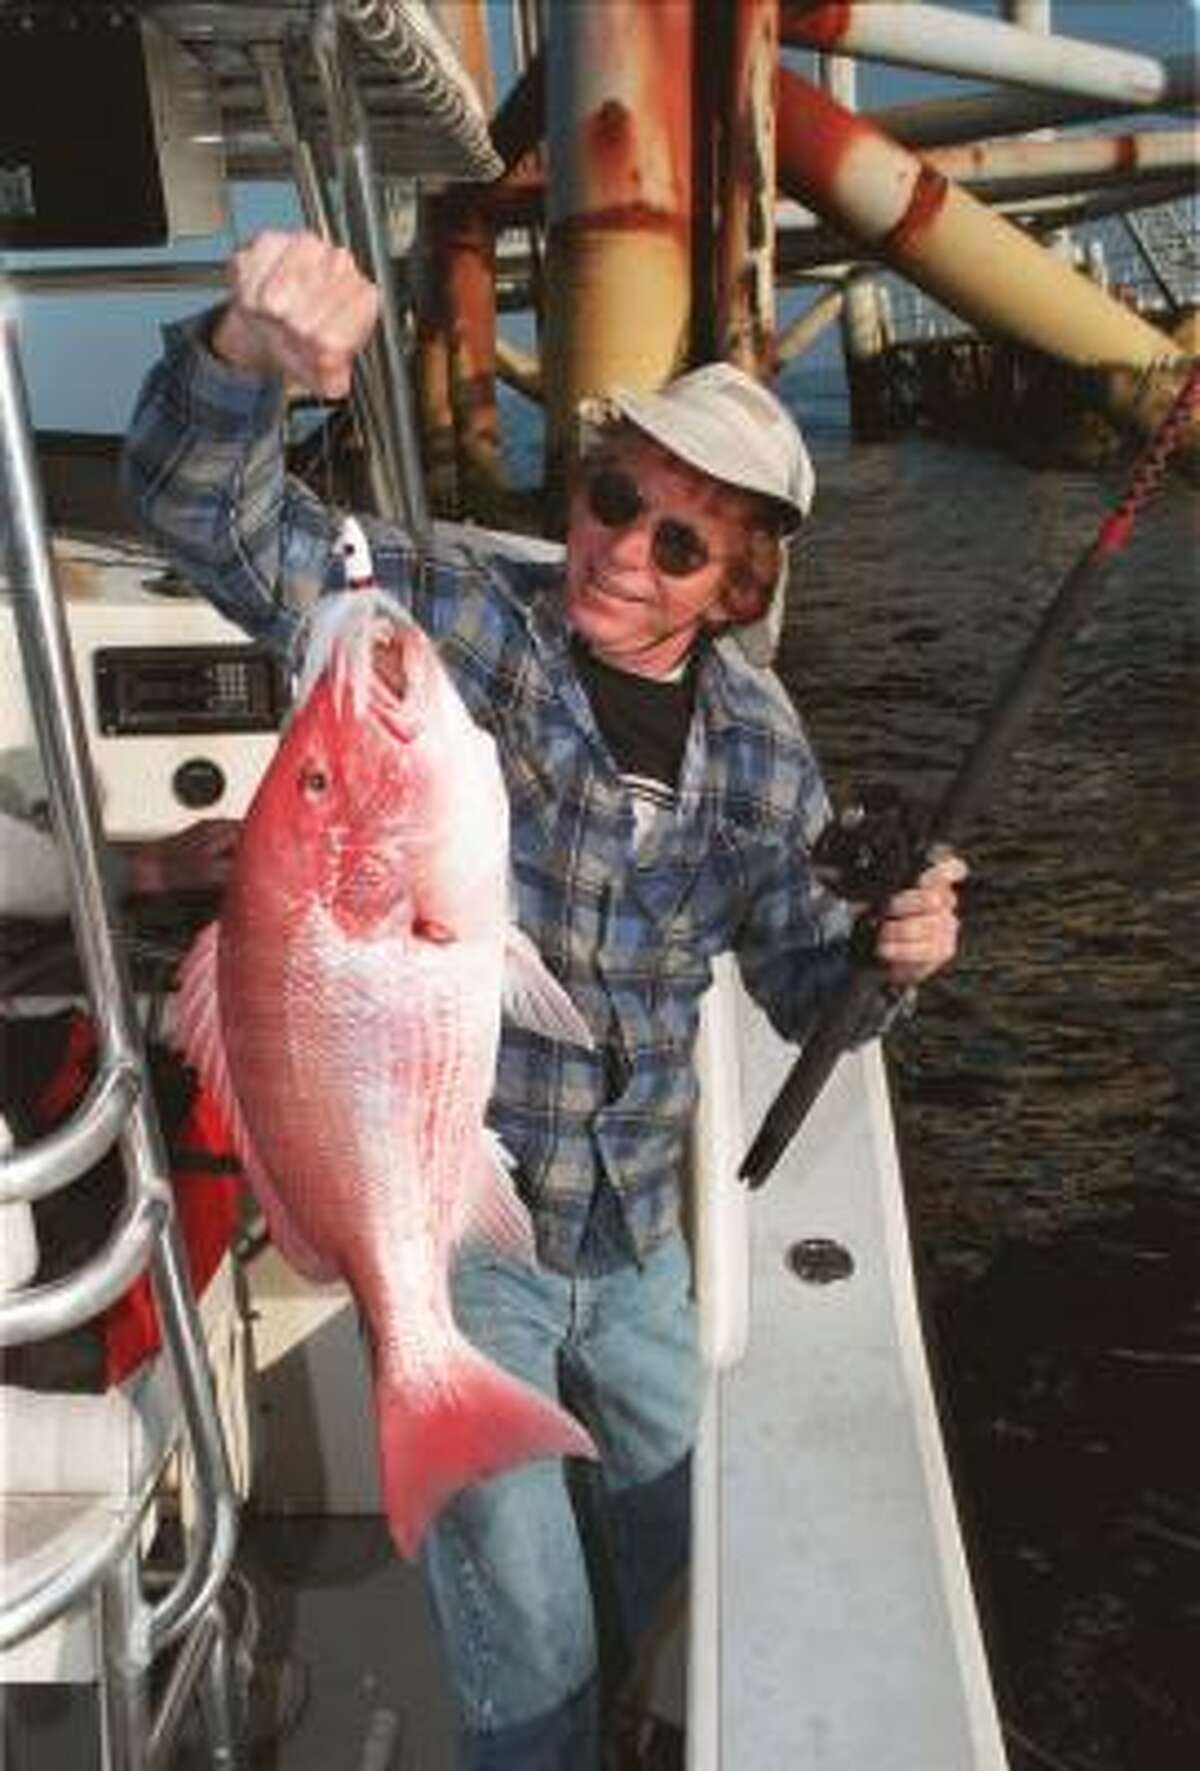 Red snapper are among the species that could be raised offshore for commercial use.